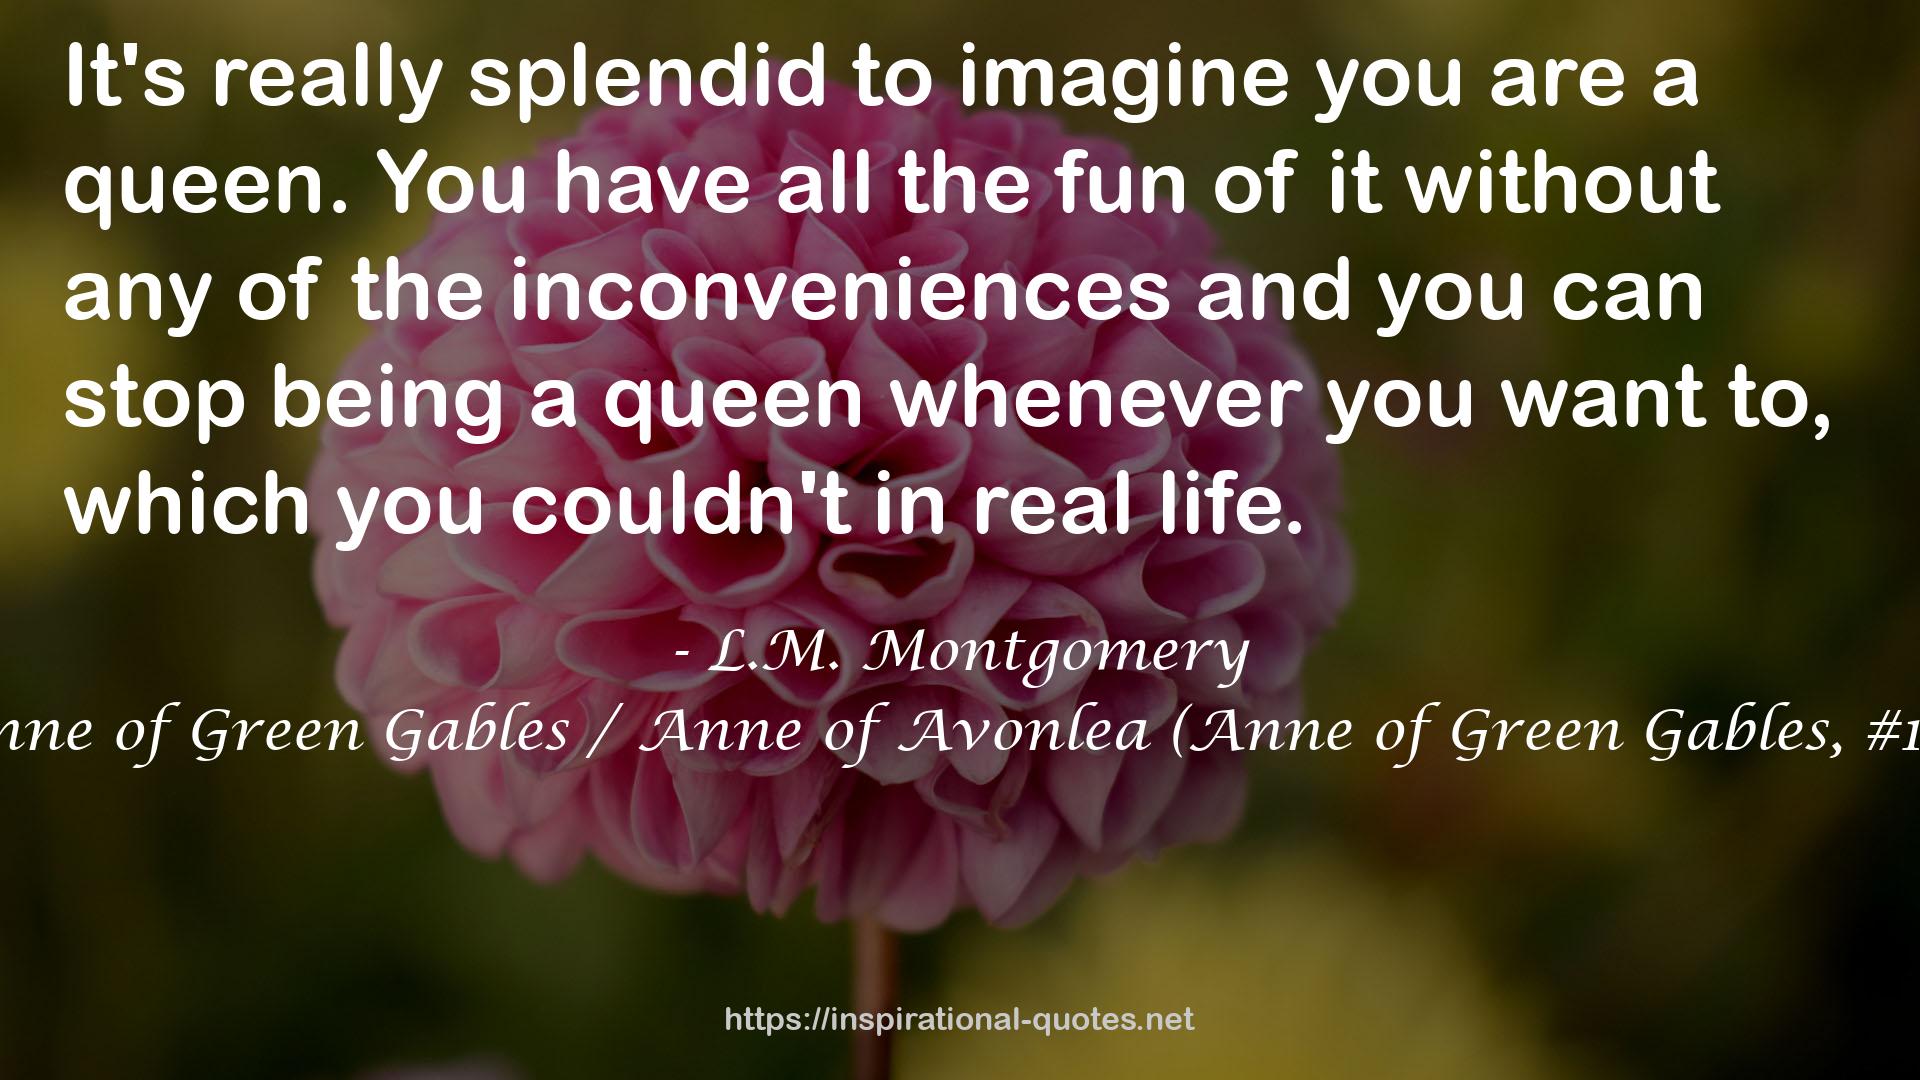 Anne of Green Gables / Anne of Avonlea (Anne of Green Gables, #1-2) QUOTES